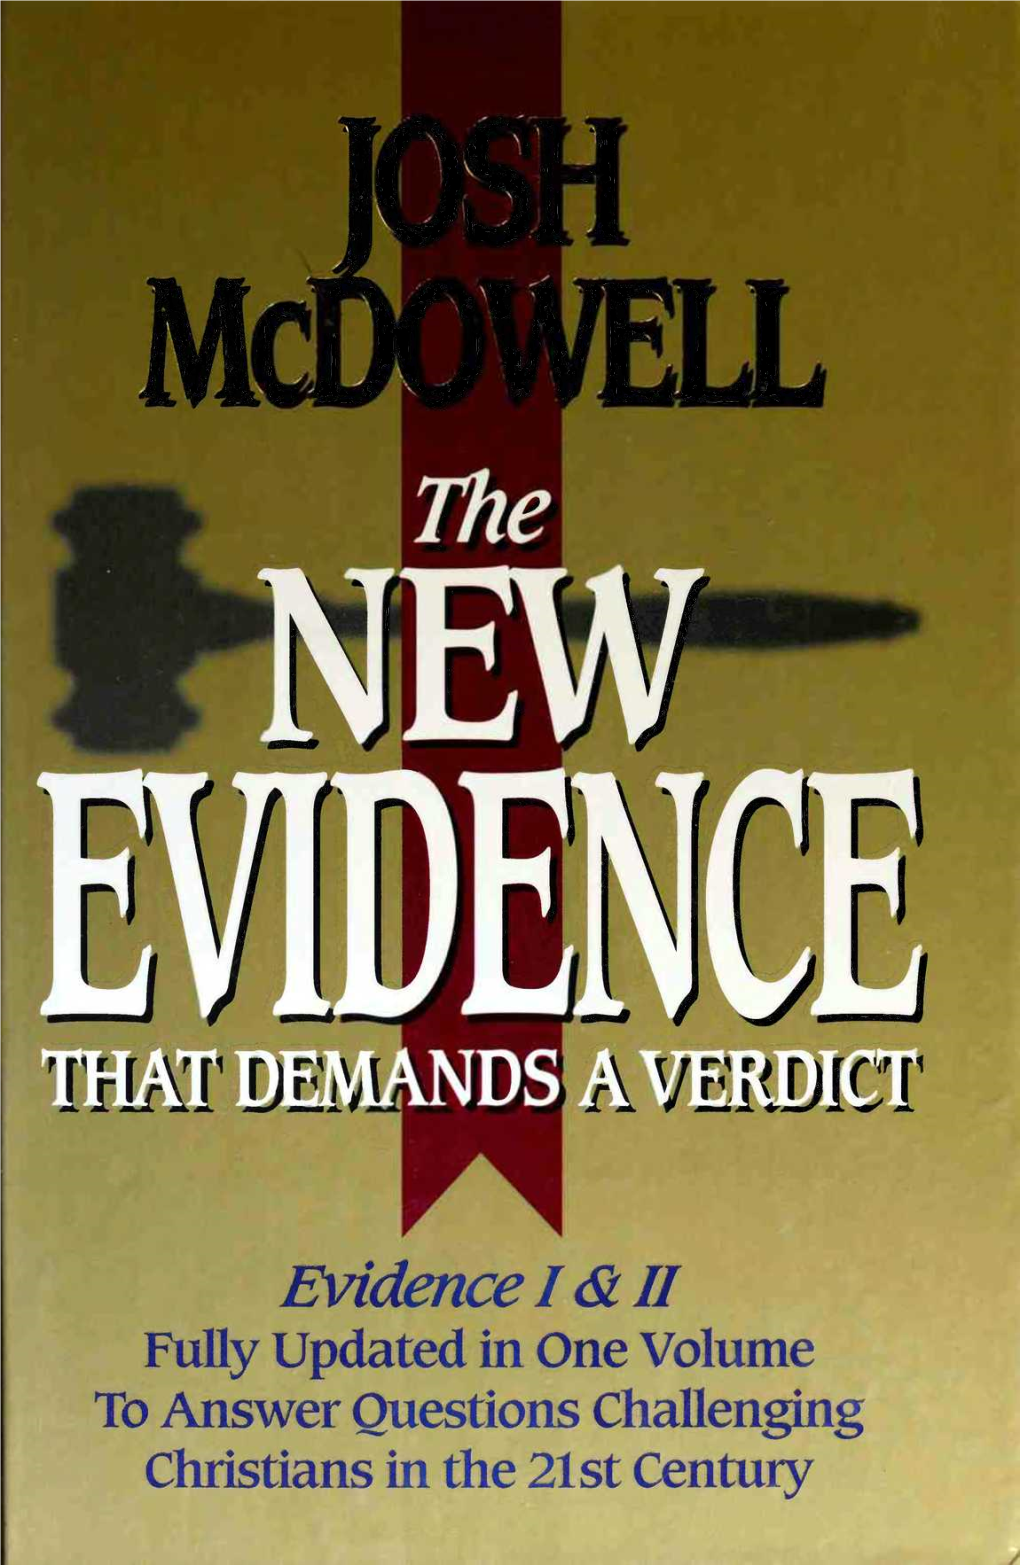 The NEW EVIDENCE THAT DEMANDS a VERDICT Other Josh Mcdowell Titles AVAILABLE from THOMAS NELSON